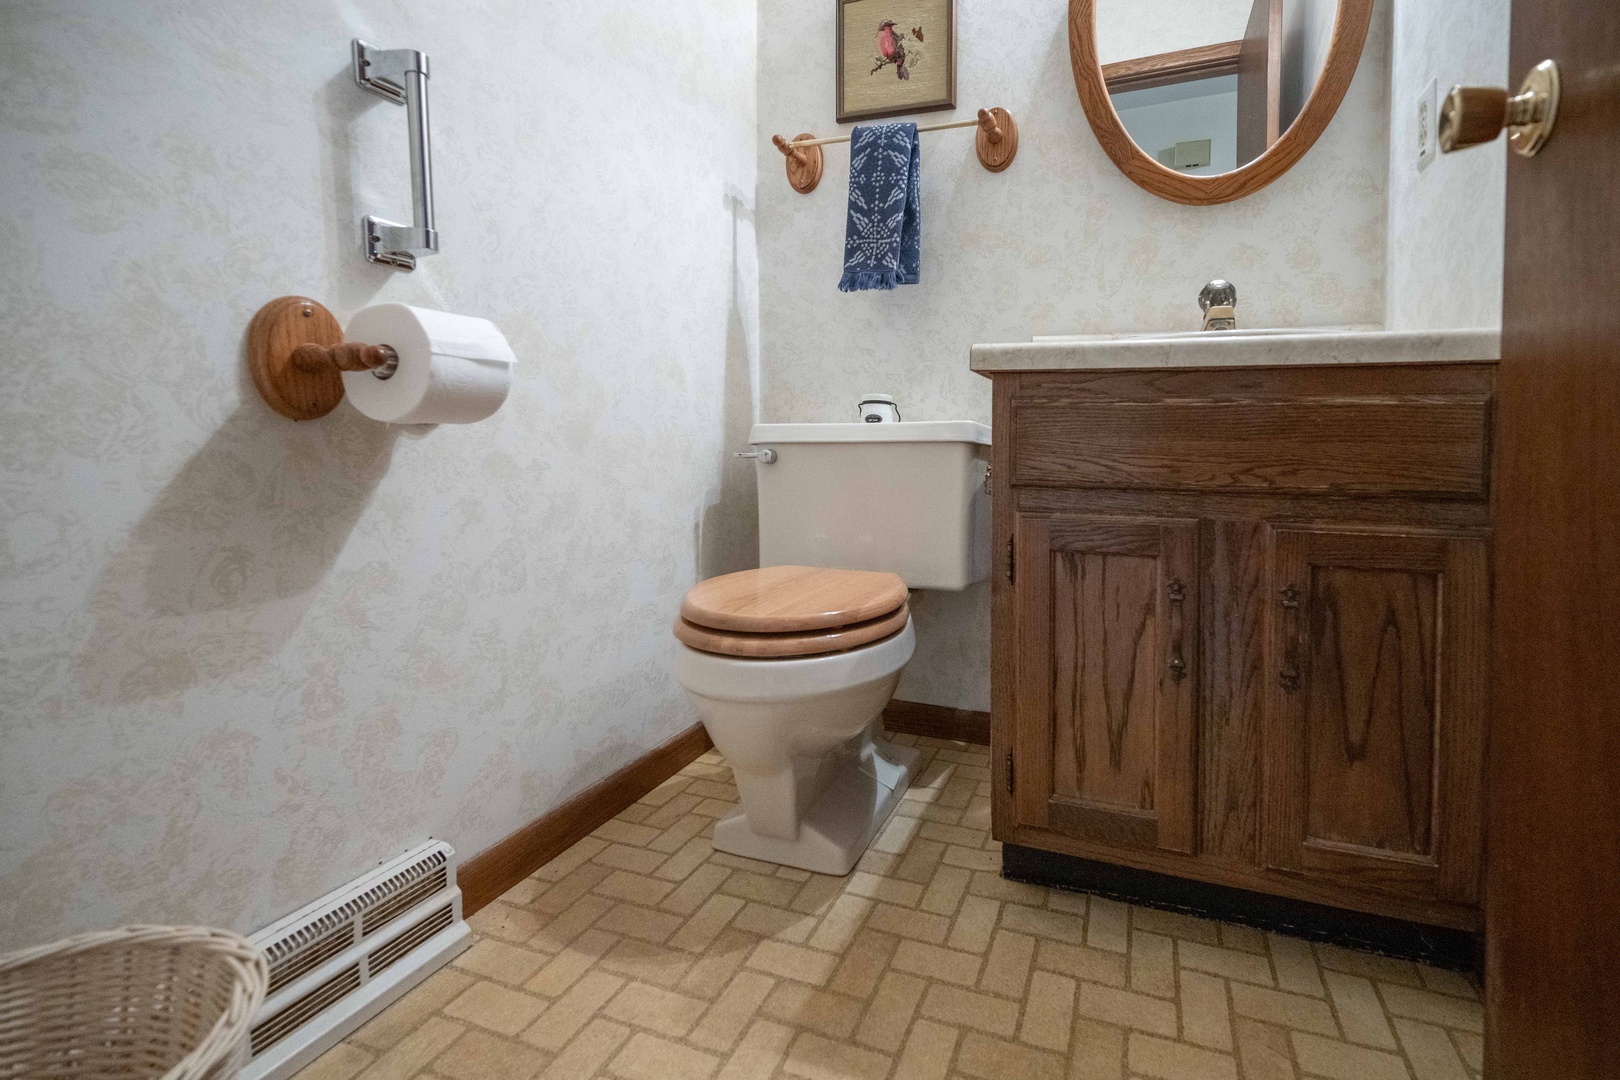 A convenient half bathroom is tucked away on the first floor